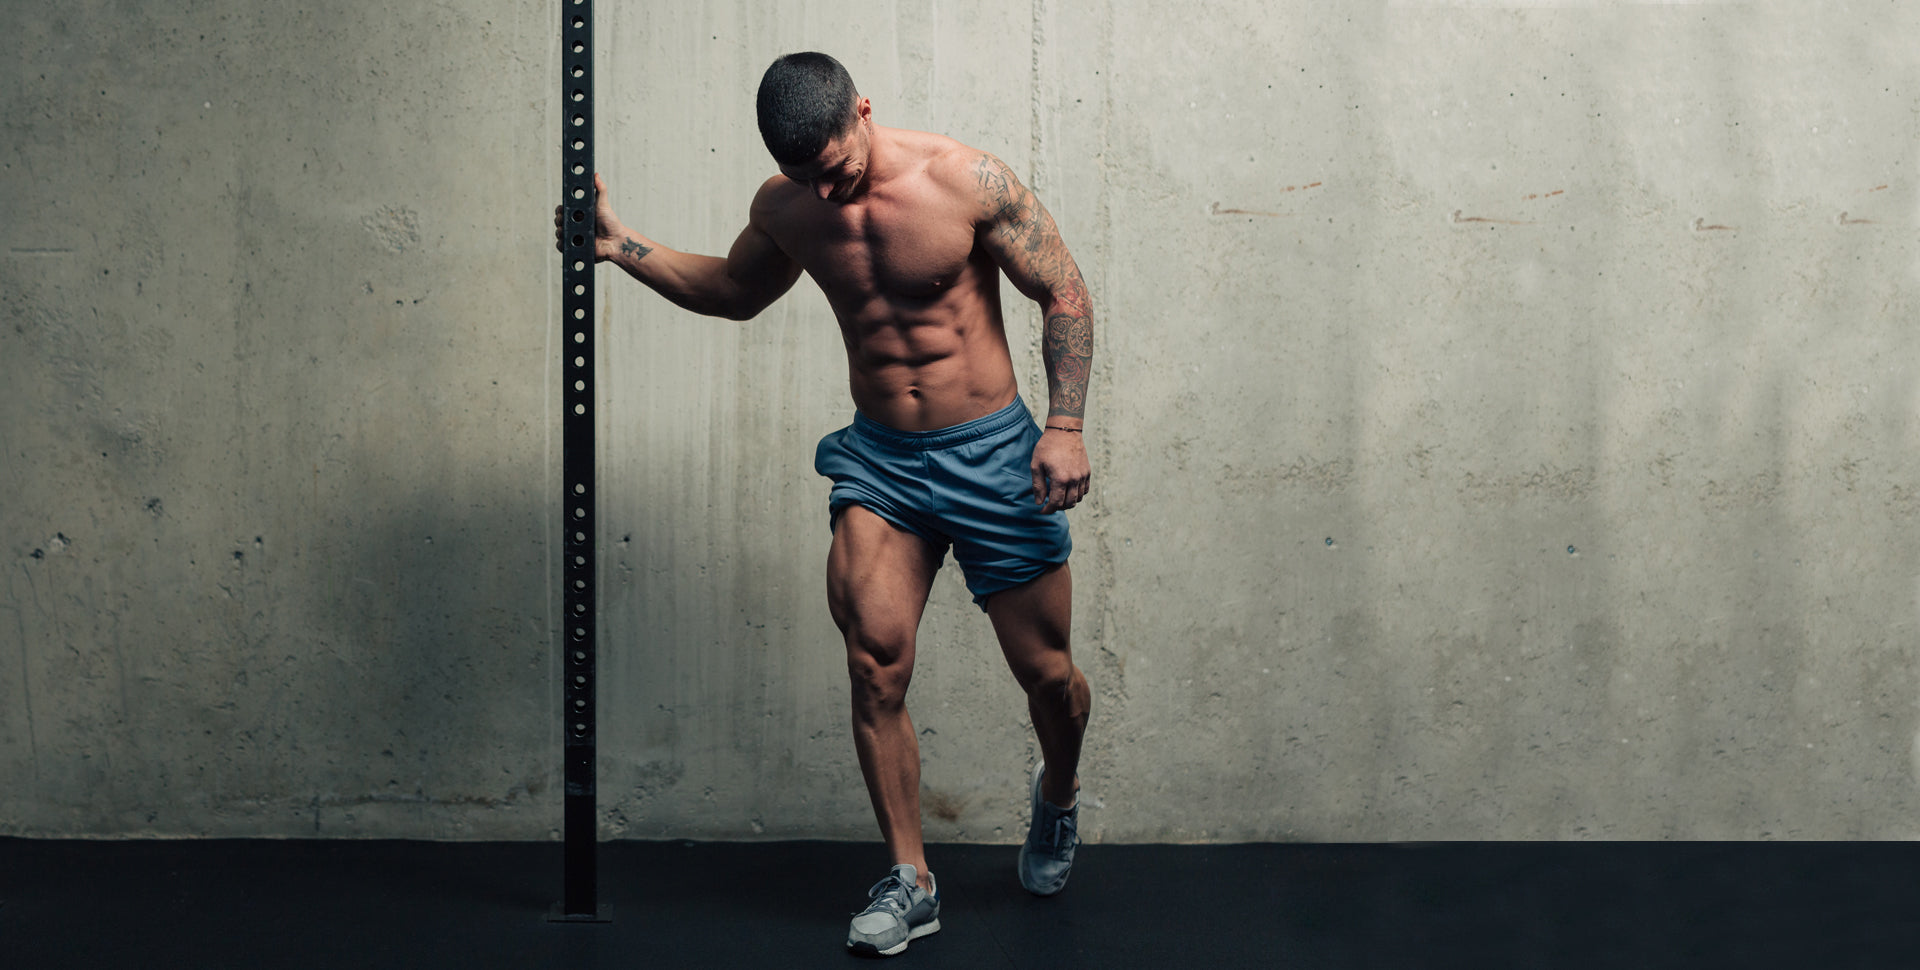 10 Best Thigh Exercises For Leg Day Workouts - Steel Supplements